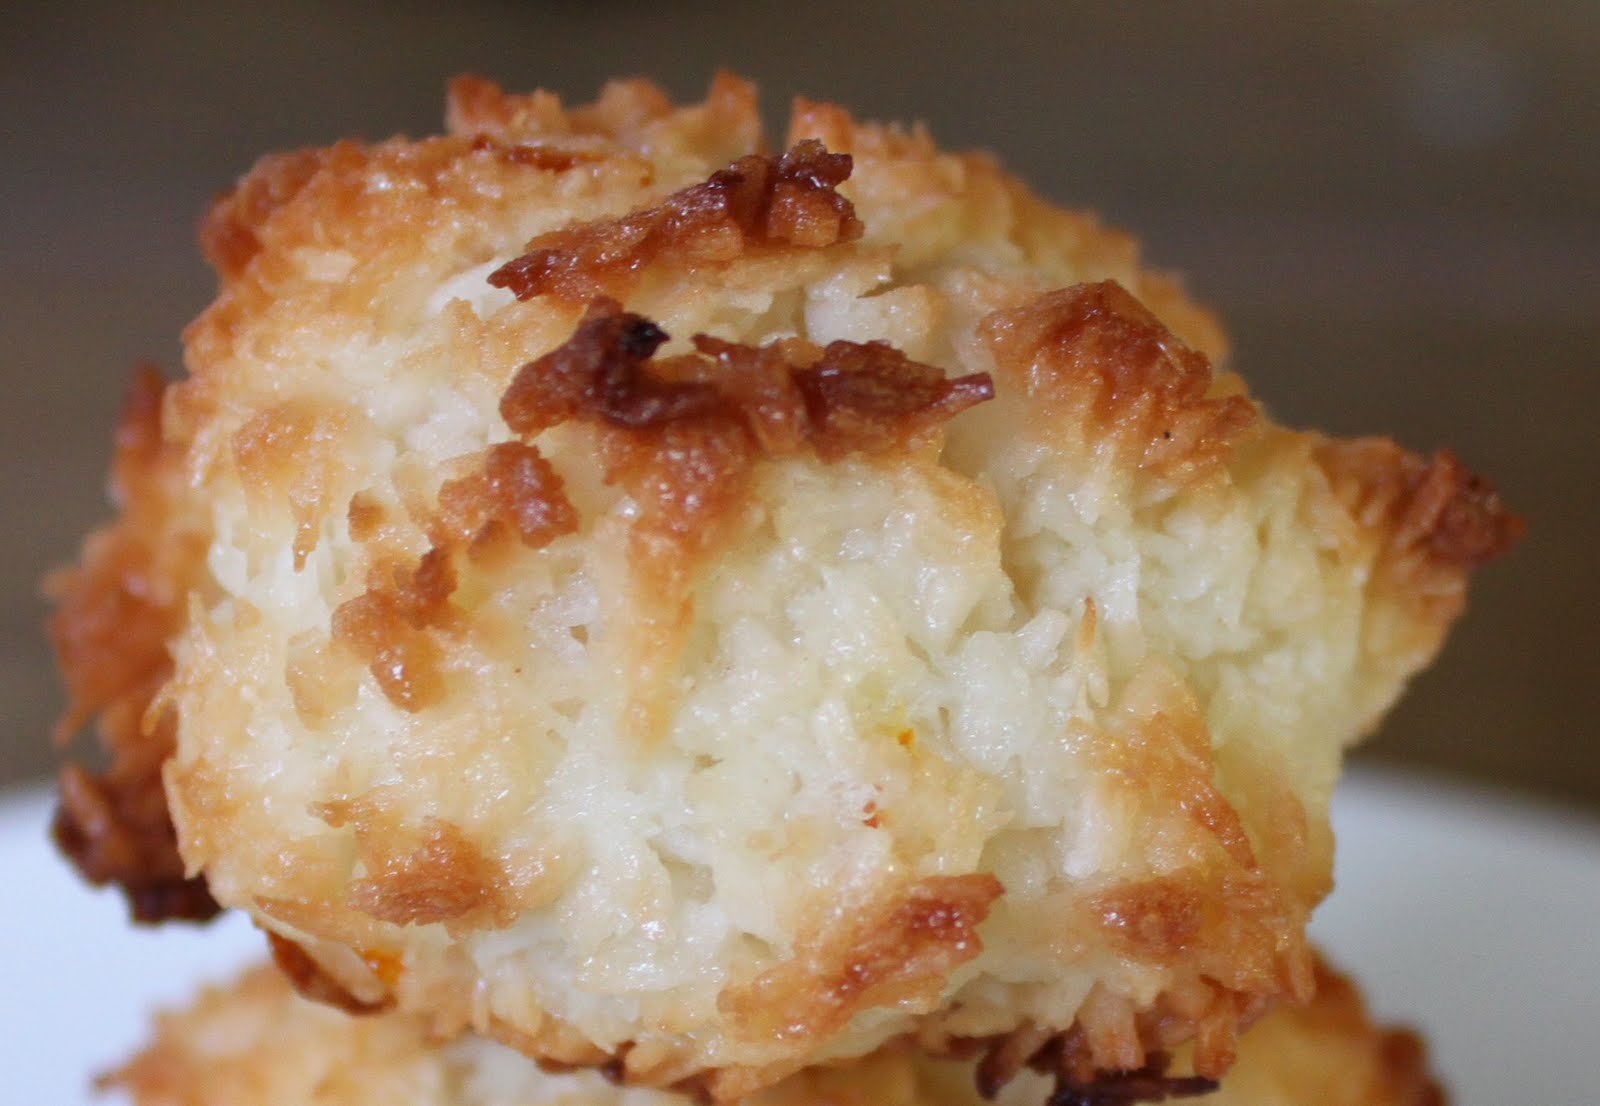 So, I set out to make the coconut macaroons today, which is 84 degrees 